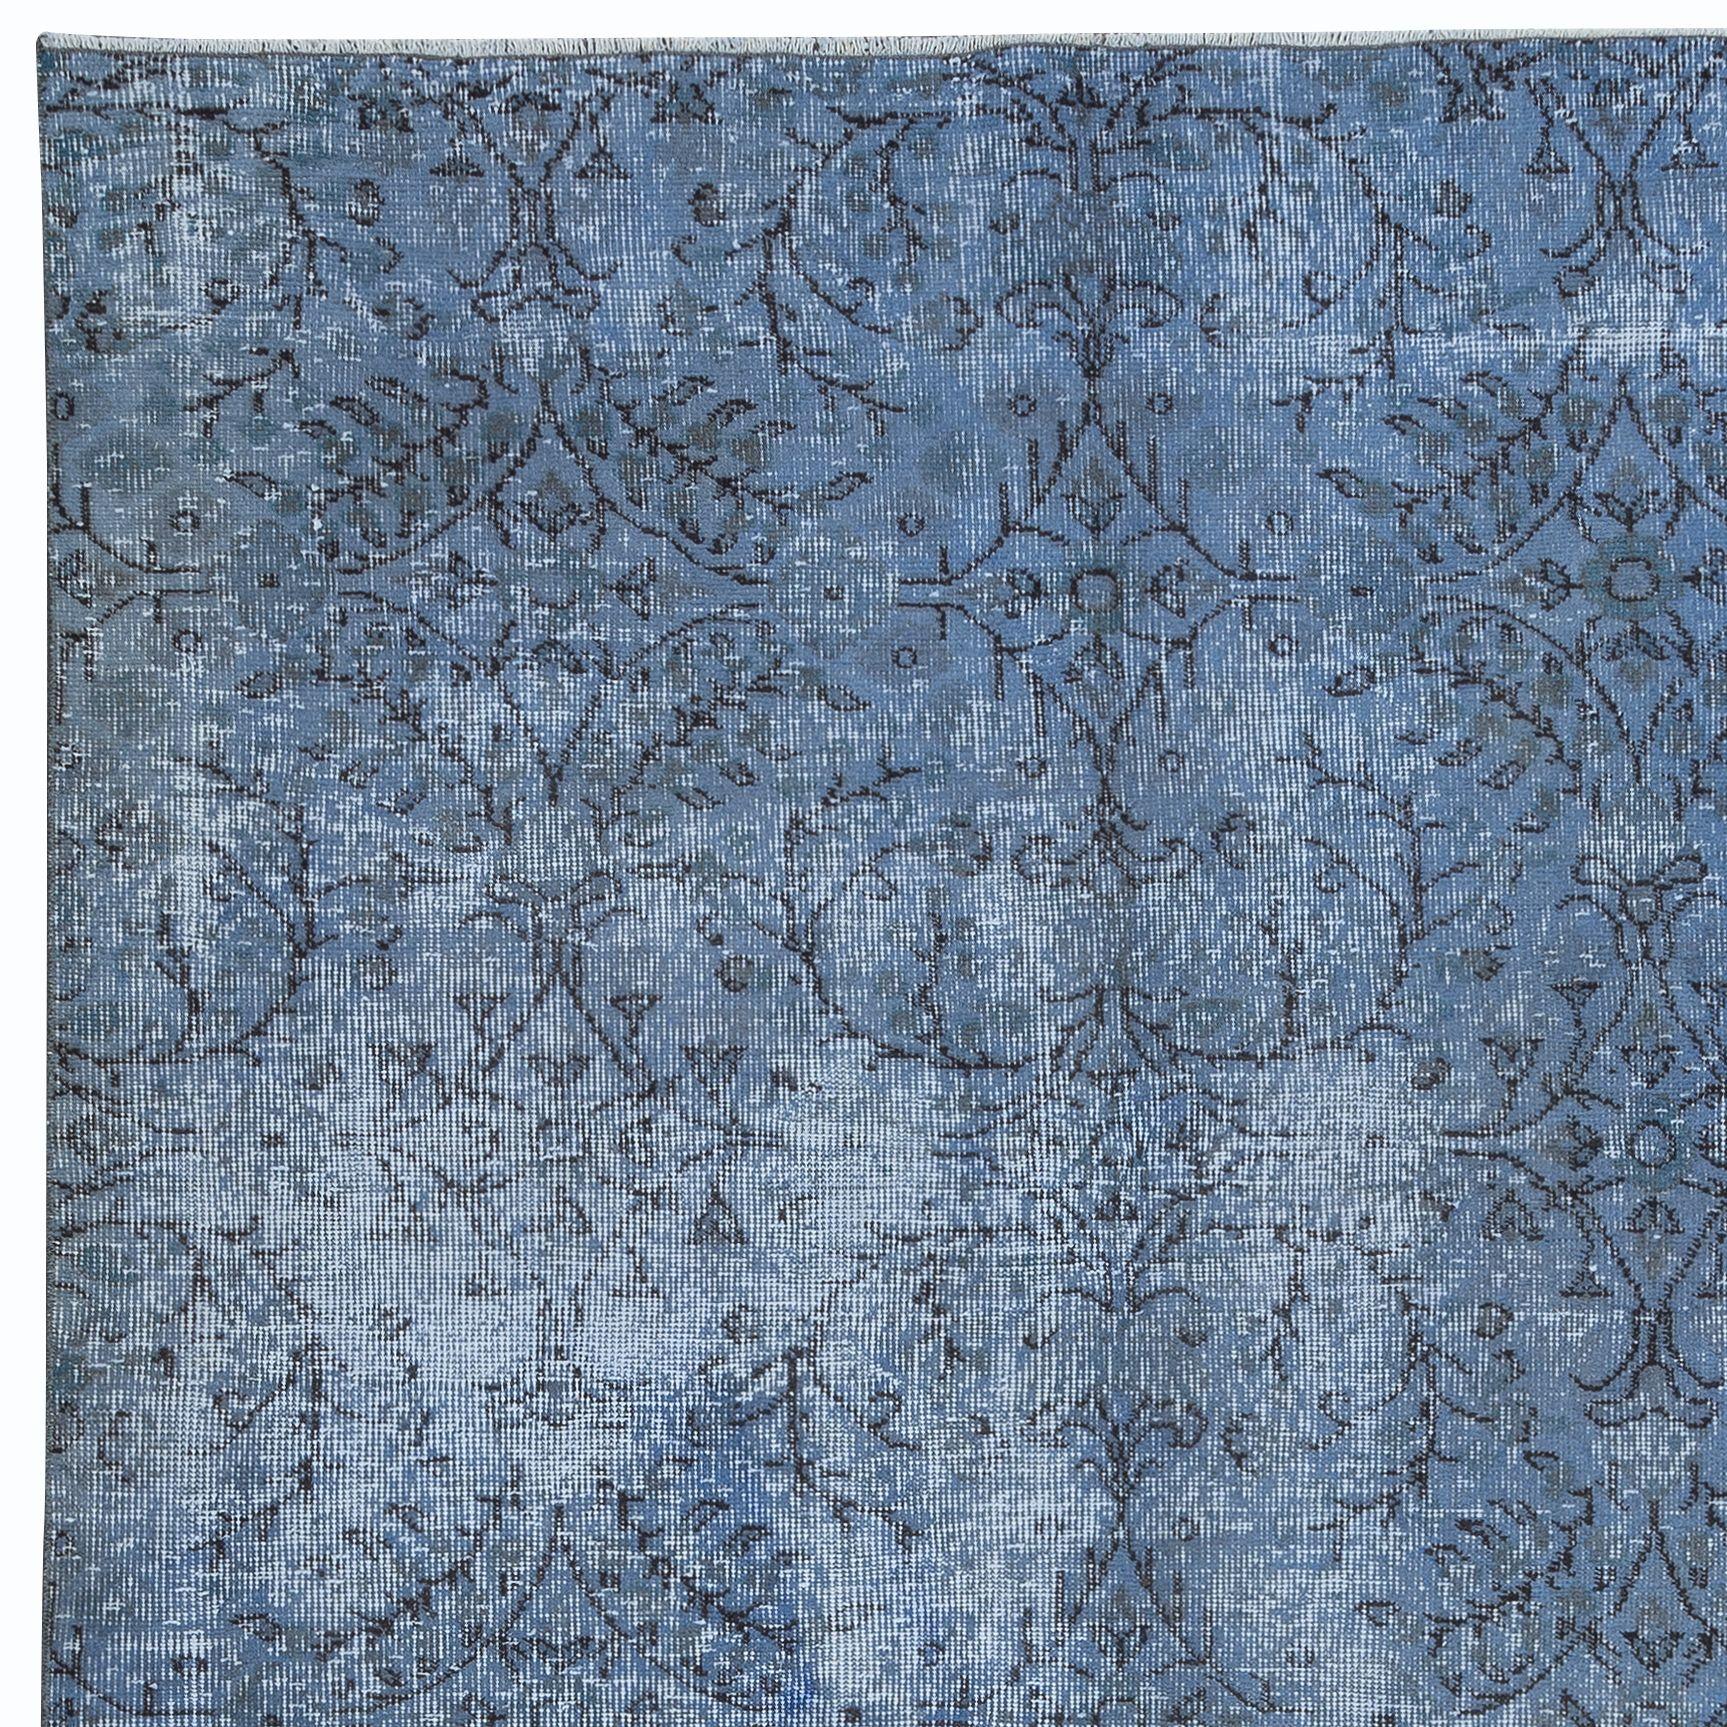 Hand-Woven 5.4x9 Ft Sky Blue Modern Area Rug, Handwoven and Handknotted in Isparta, Turkey. For Sale